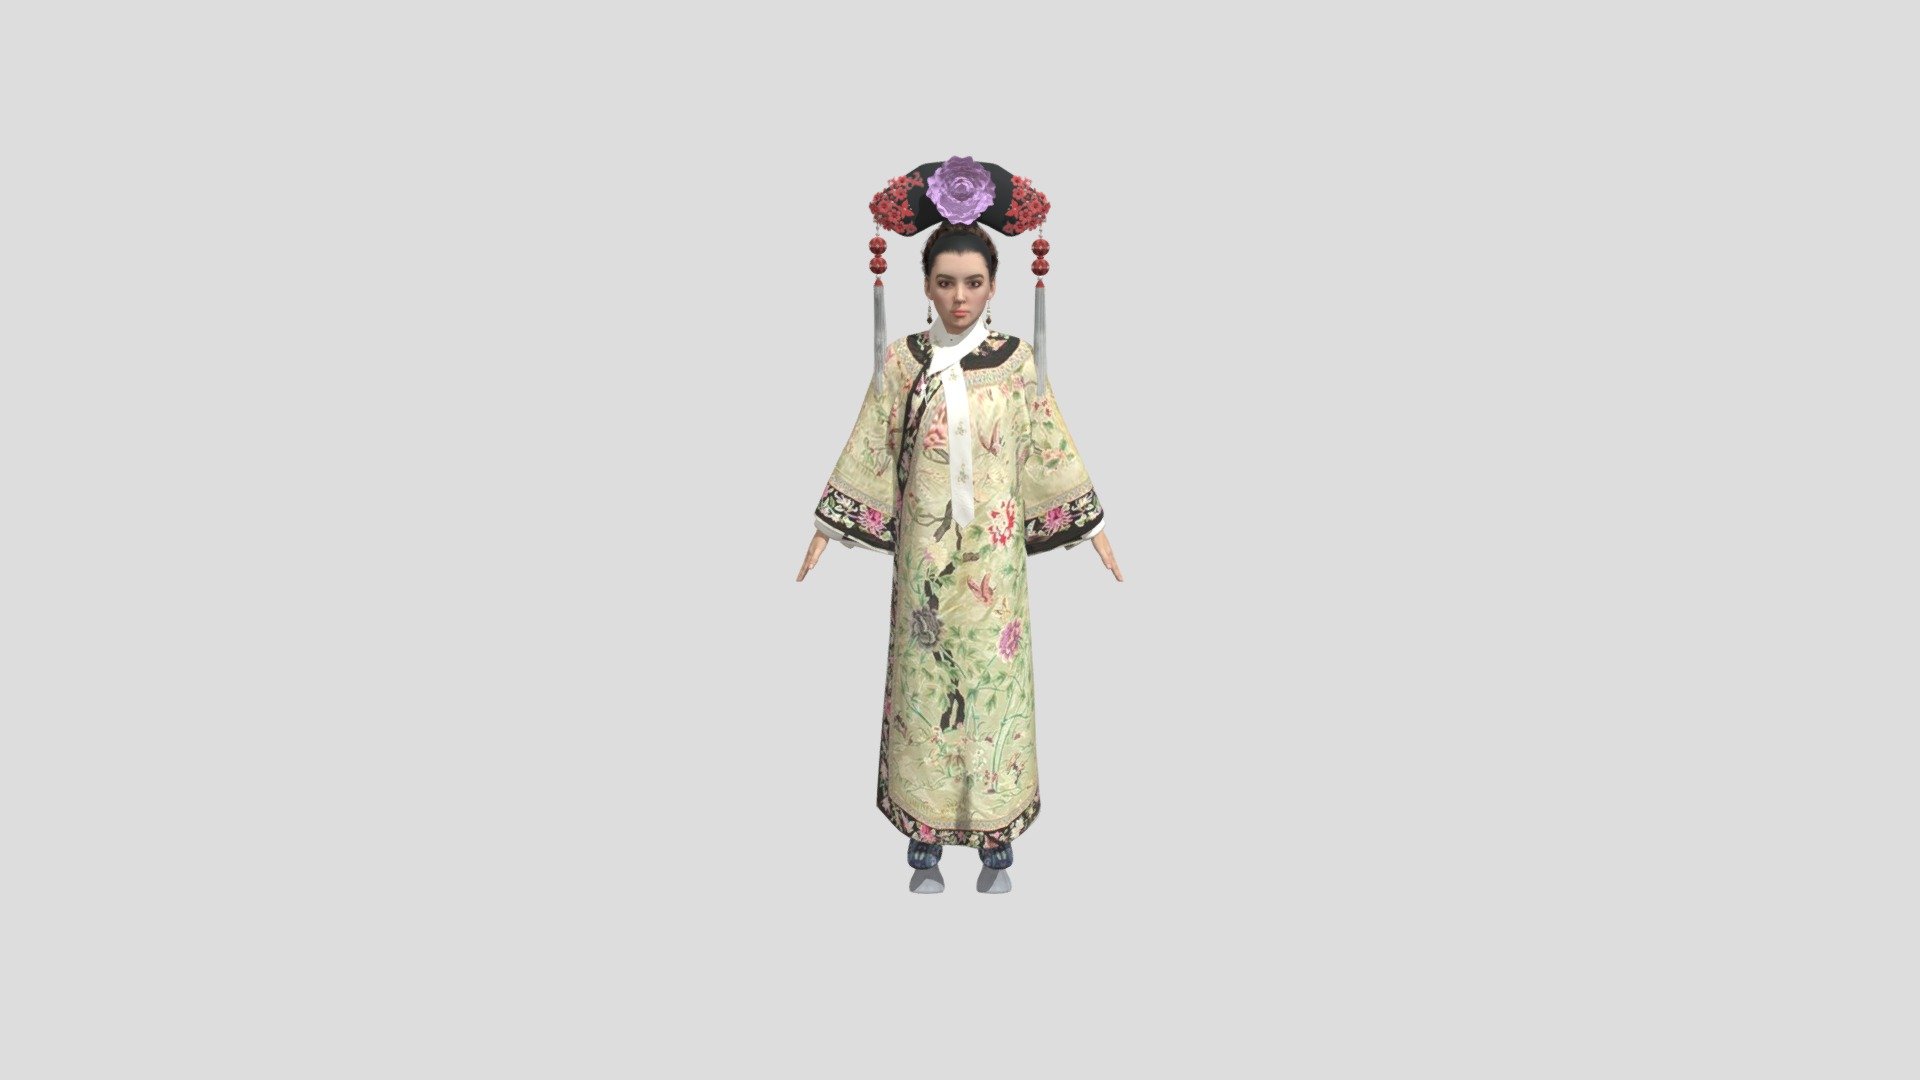 Chinese Ancient Traditional Qing Dynasty
https://www.artstation.com/a/19032093 - Chinese Ancient Traditional Qing Dynasty - 3D model by Smart3d (@kyhungcnttk15) 3d model